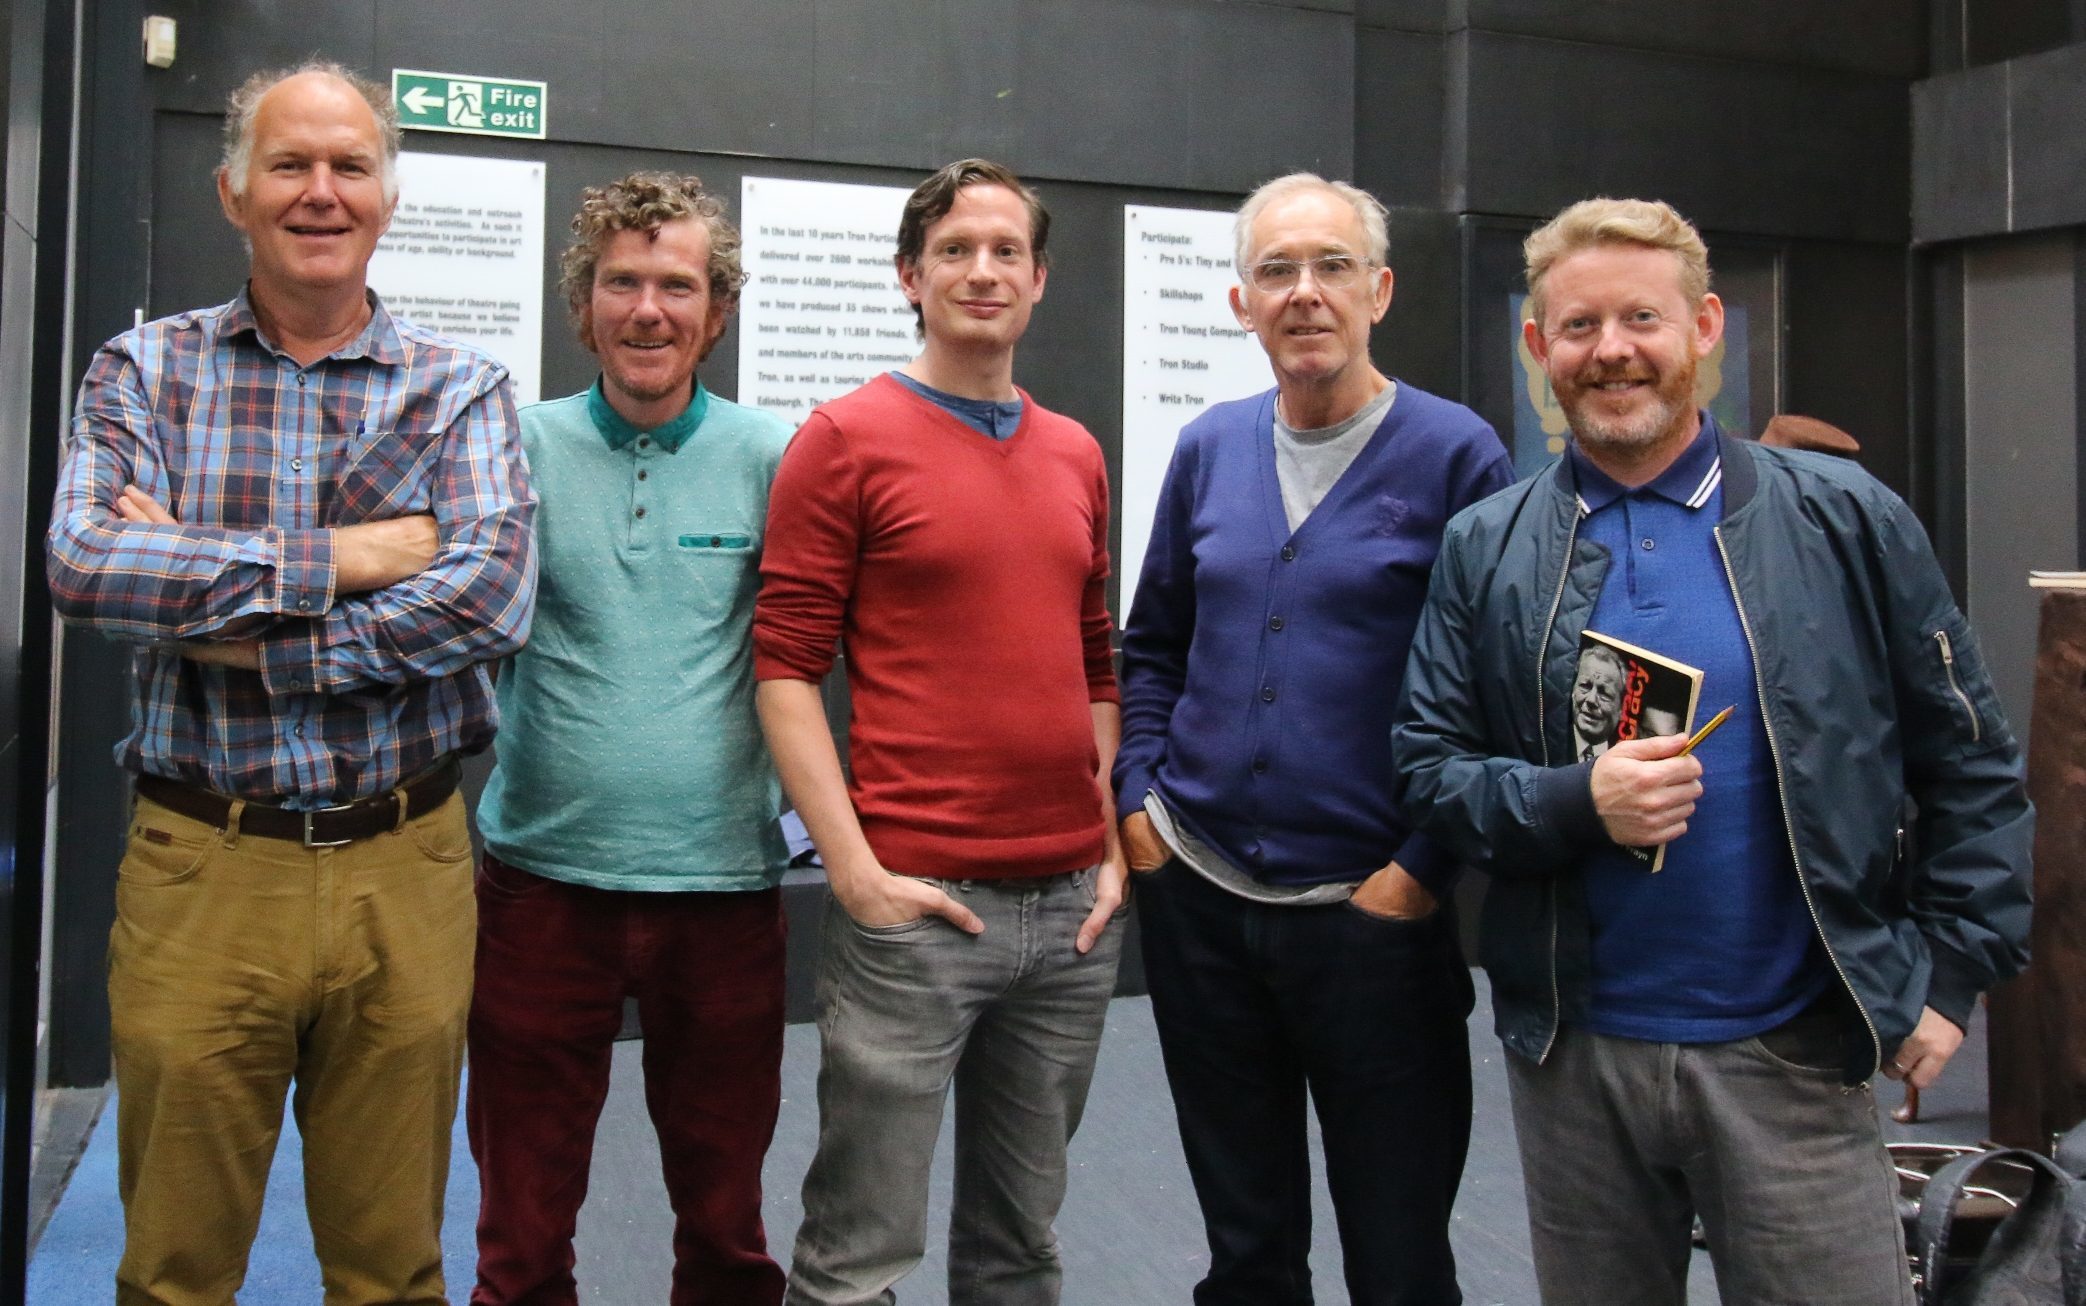 Rehearsal of Democracy - left to right,  Tom Hodgkins, Michael Moreland, Steven Scot Fitzgerald, Sean Scanlan, Colin McCredie.